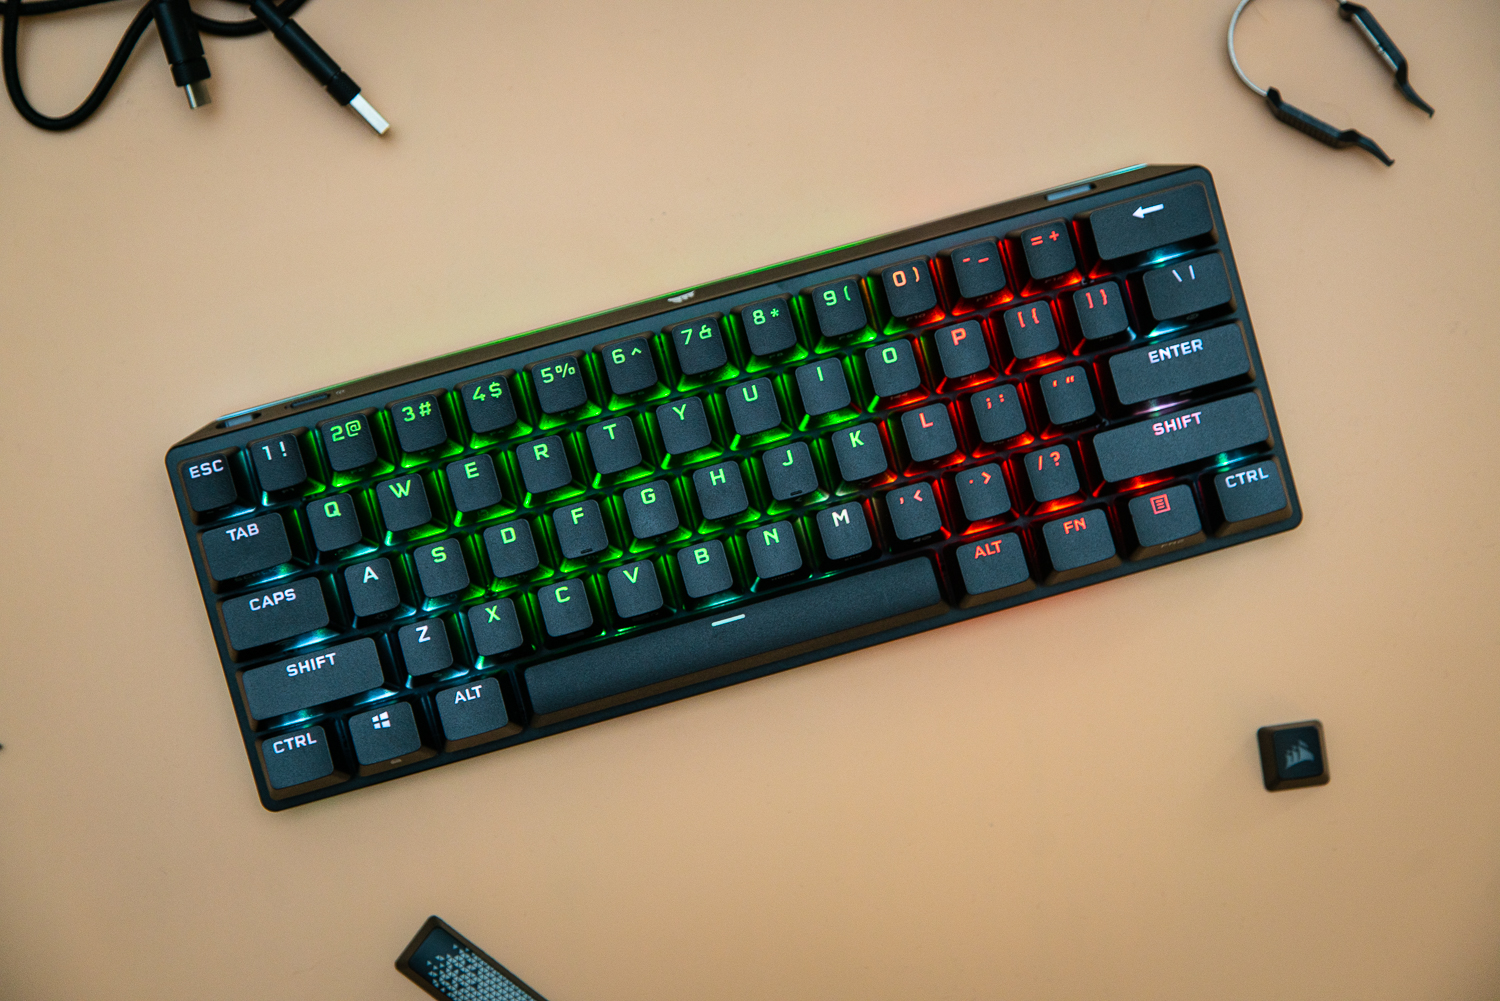 review: A new bar for gaming keyboards | Digital Trends